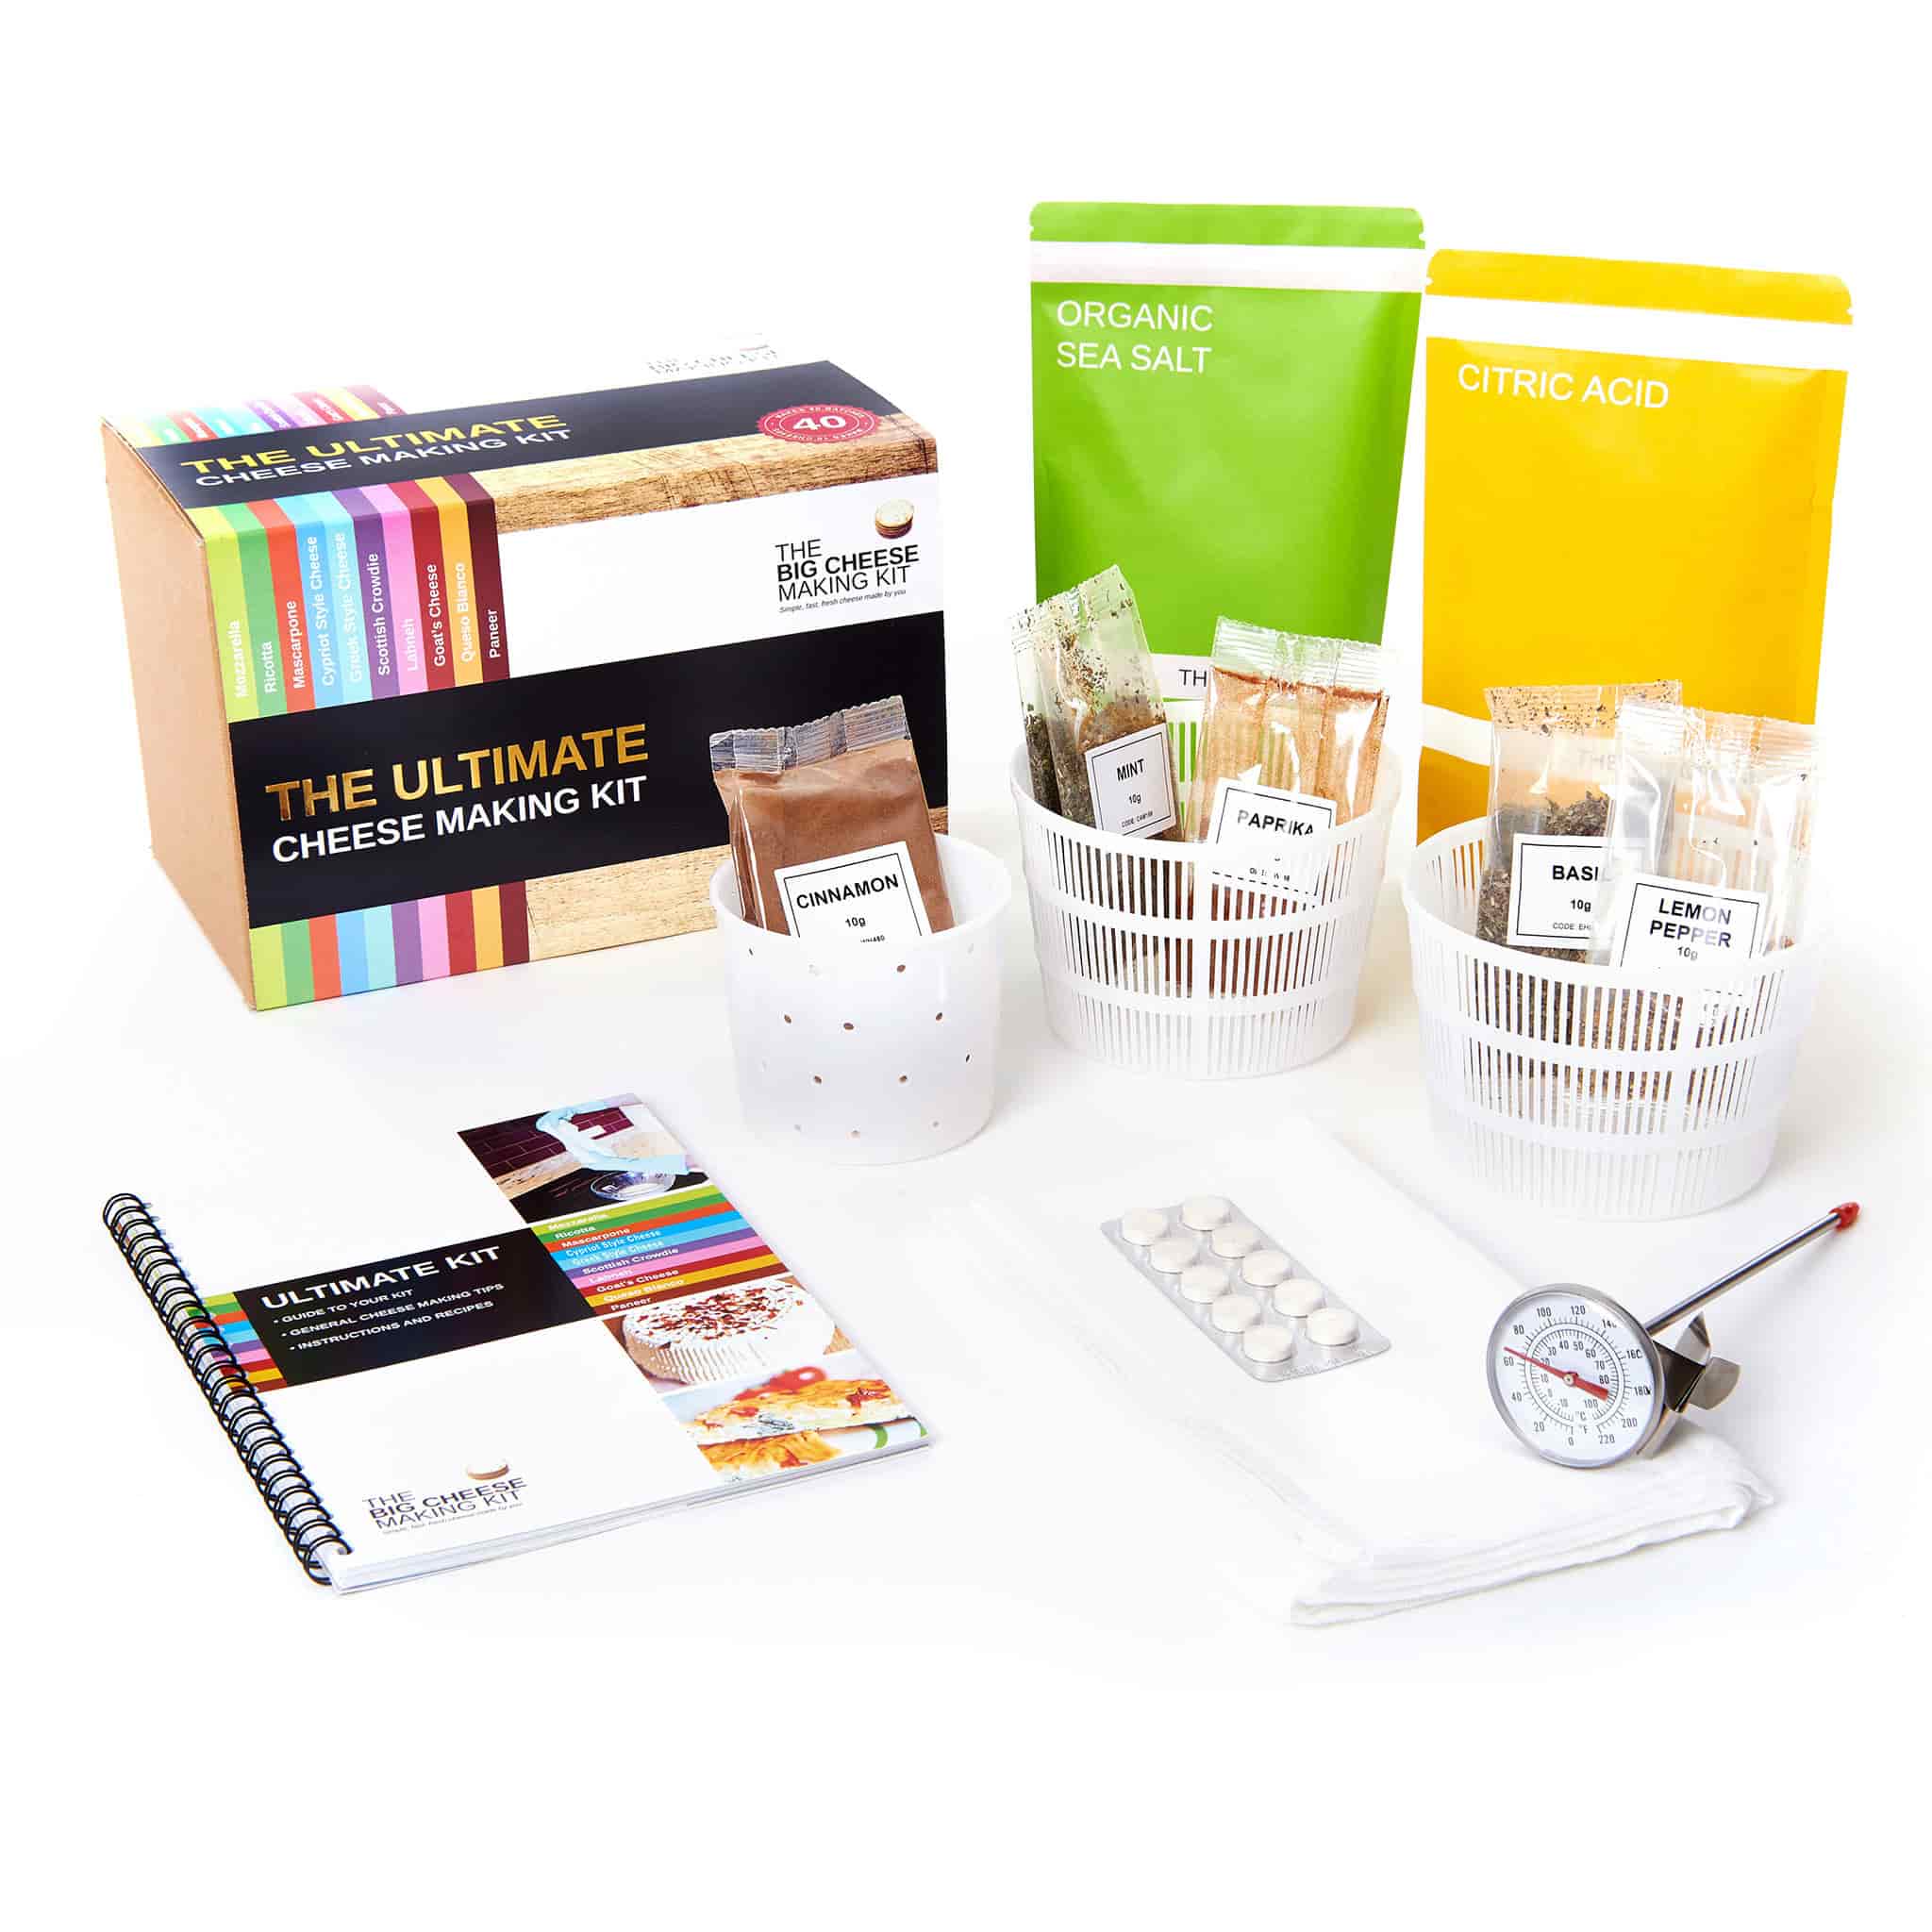 The Ultimate Cheese Making Kit 920g